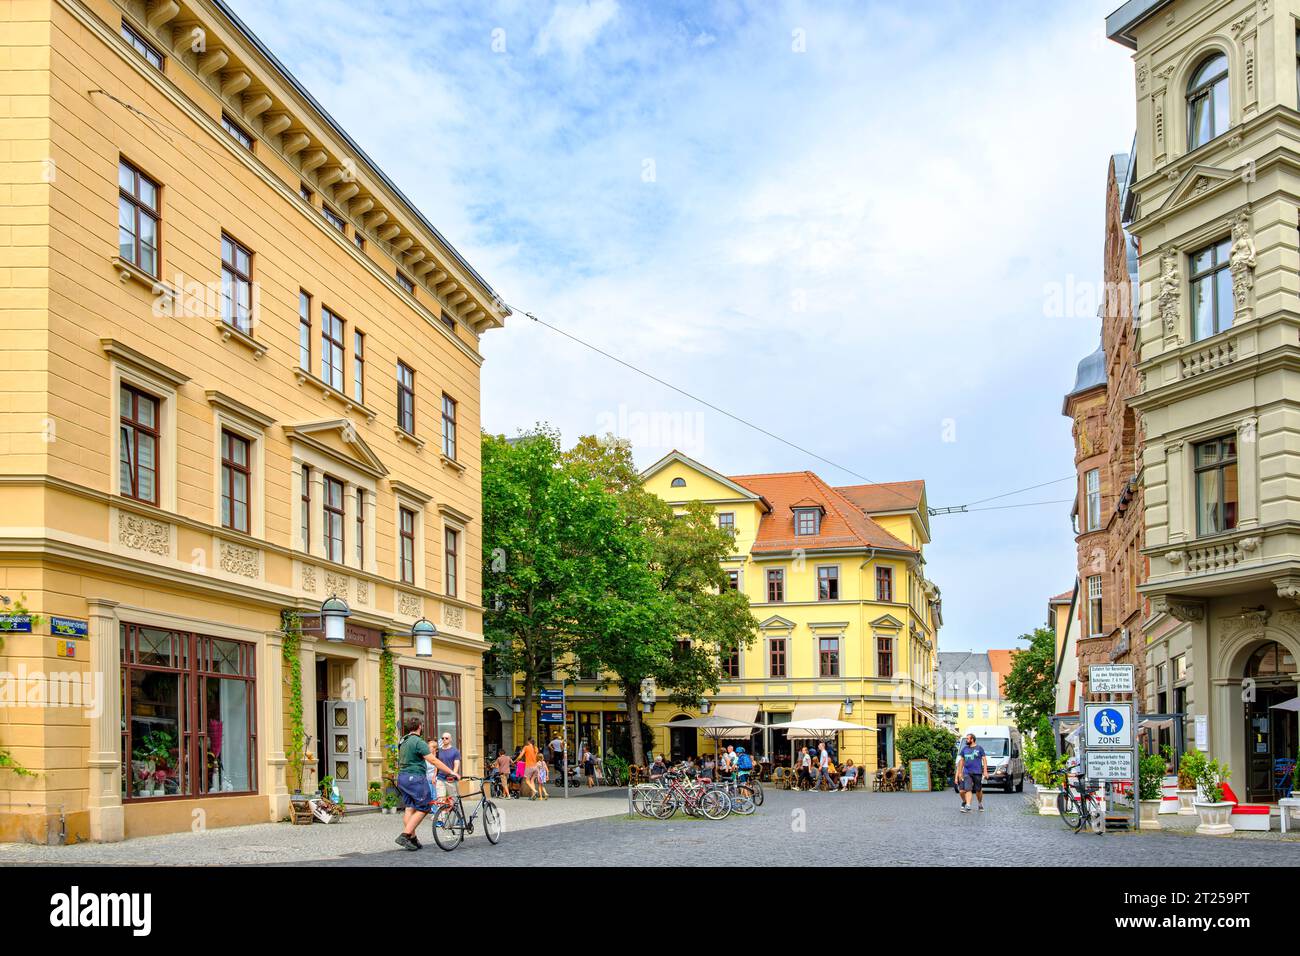 Everyday busy street scene in Frauentorstrasse in the historic inner town of Weimar, Thuringia, Germany, August 13, 2020, for editorial use only. Stock Photo